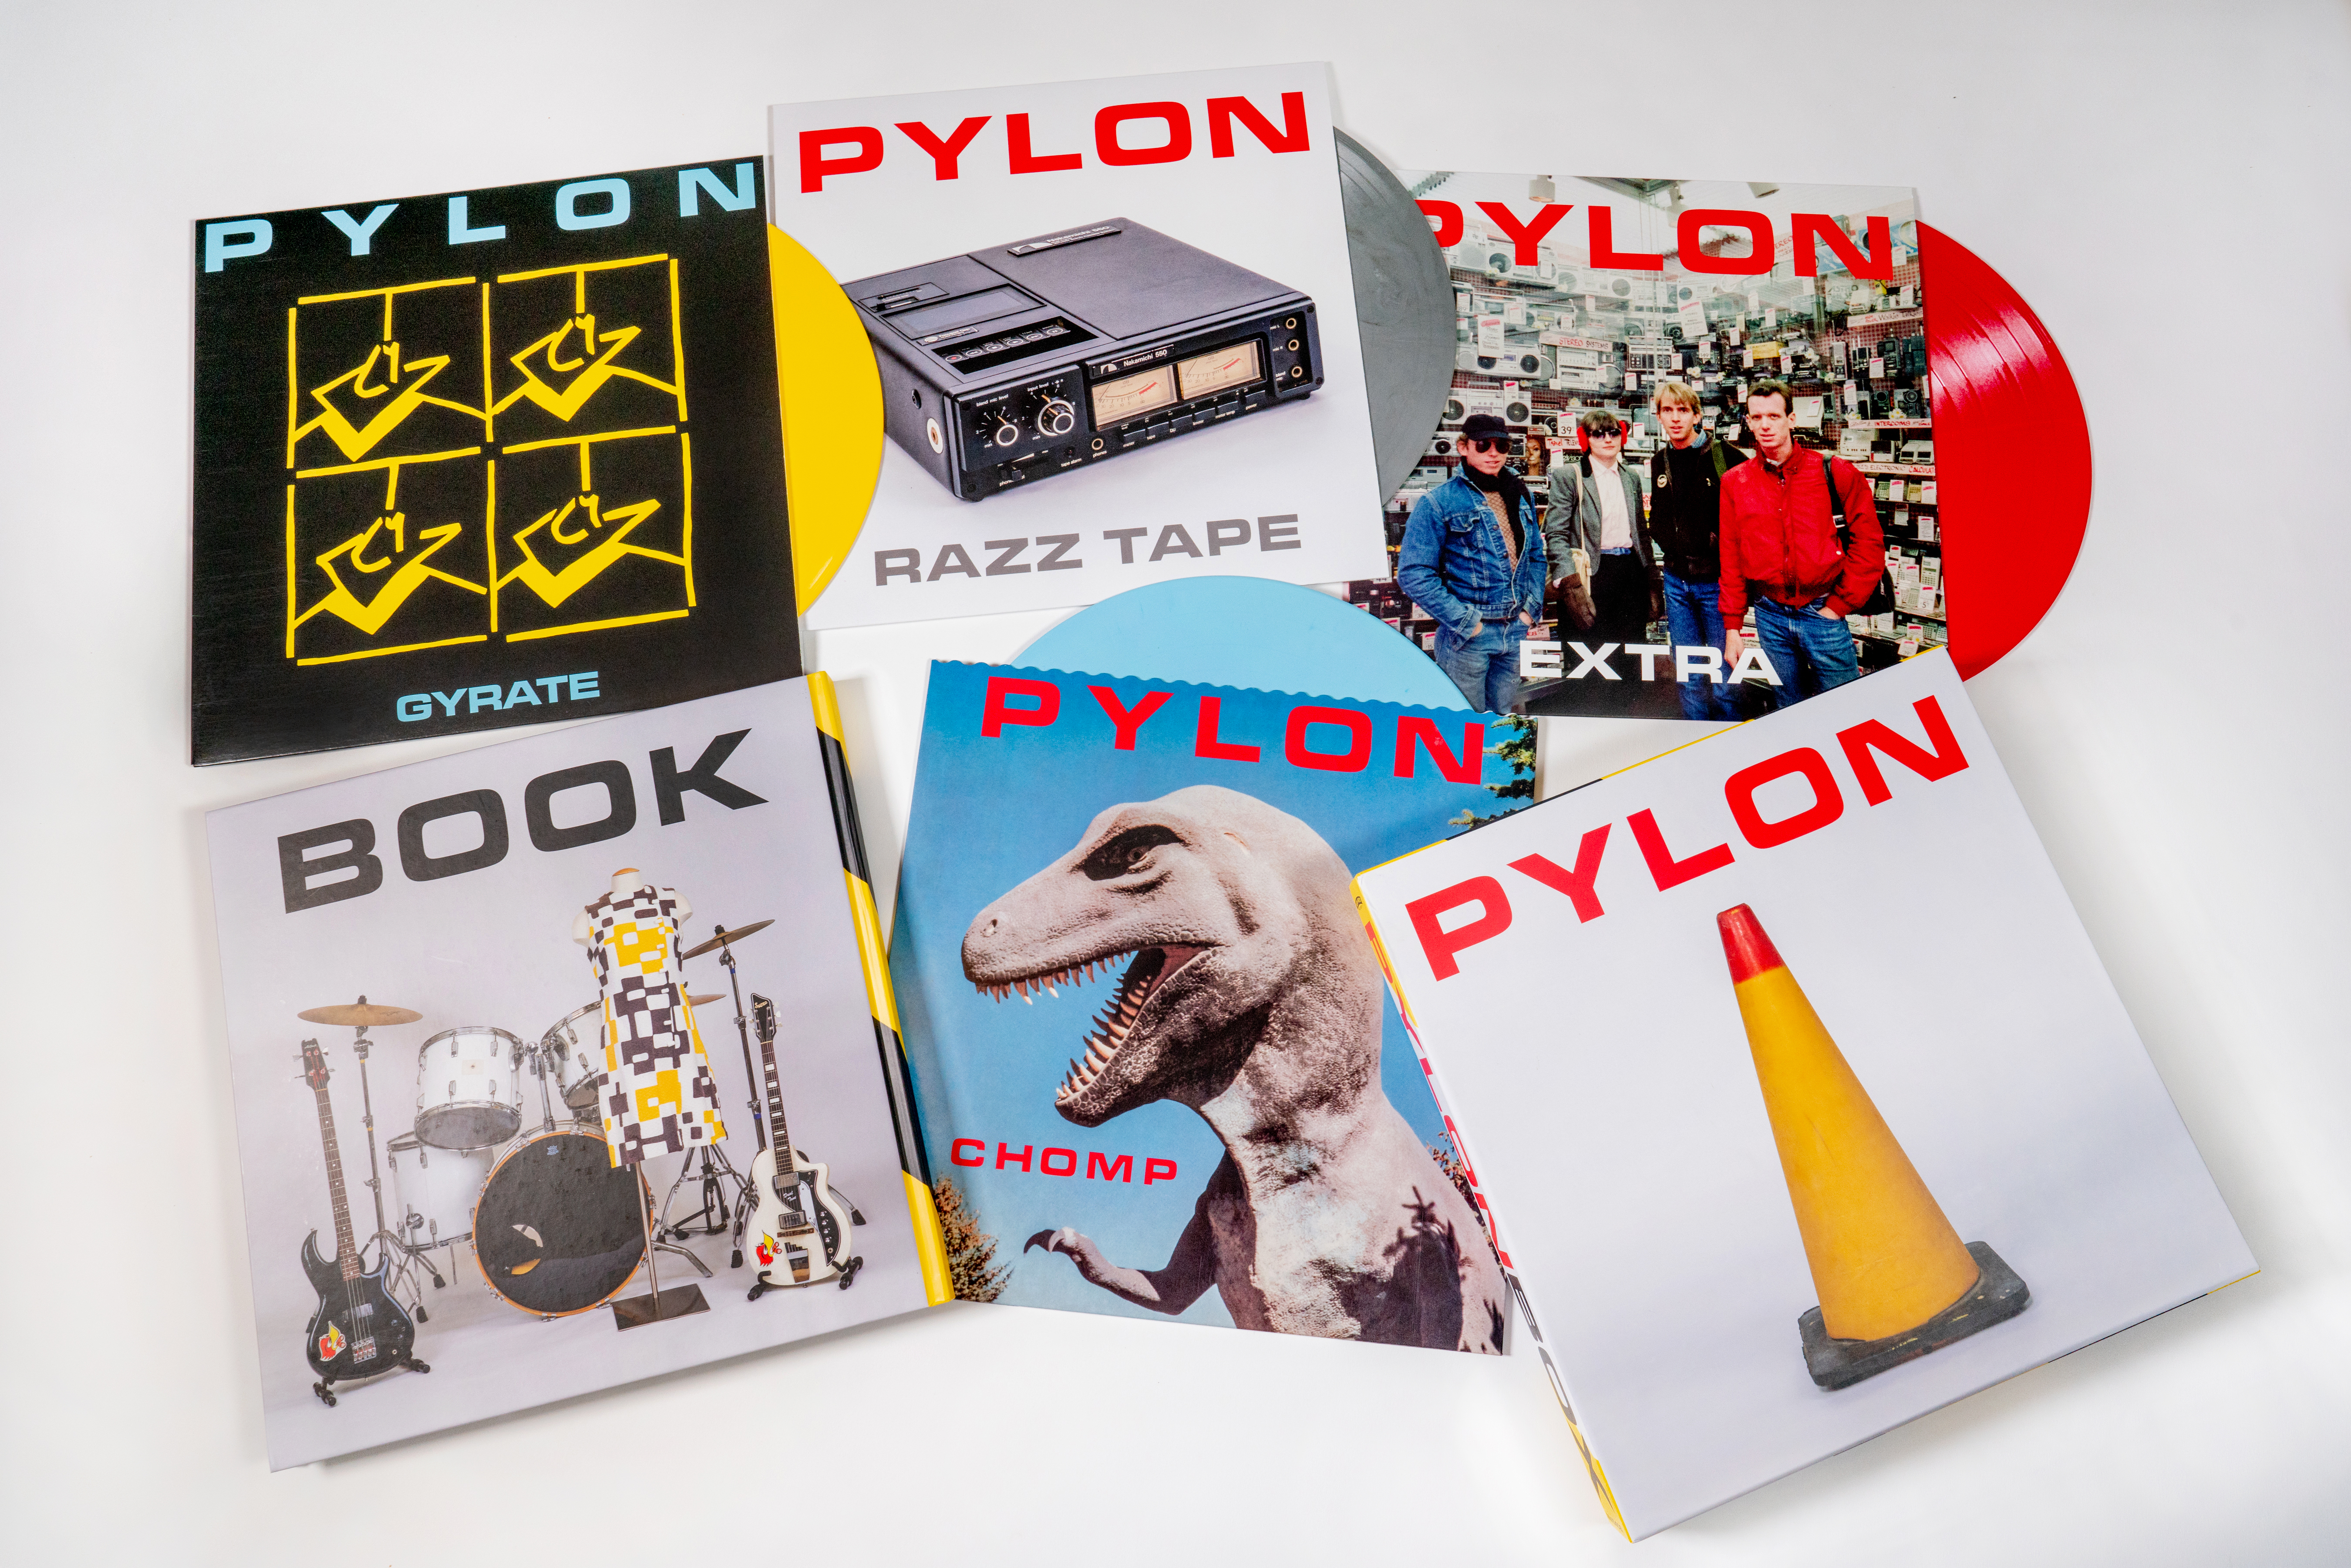 Pylon to Release Box Set With 18 Unreleased Recordings